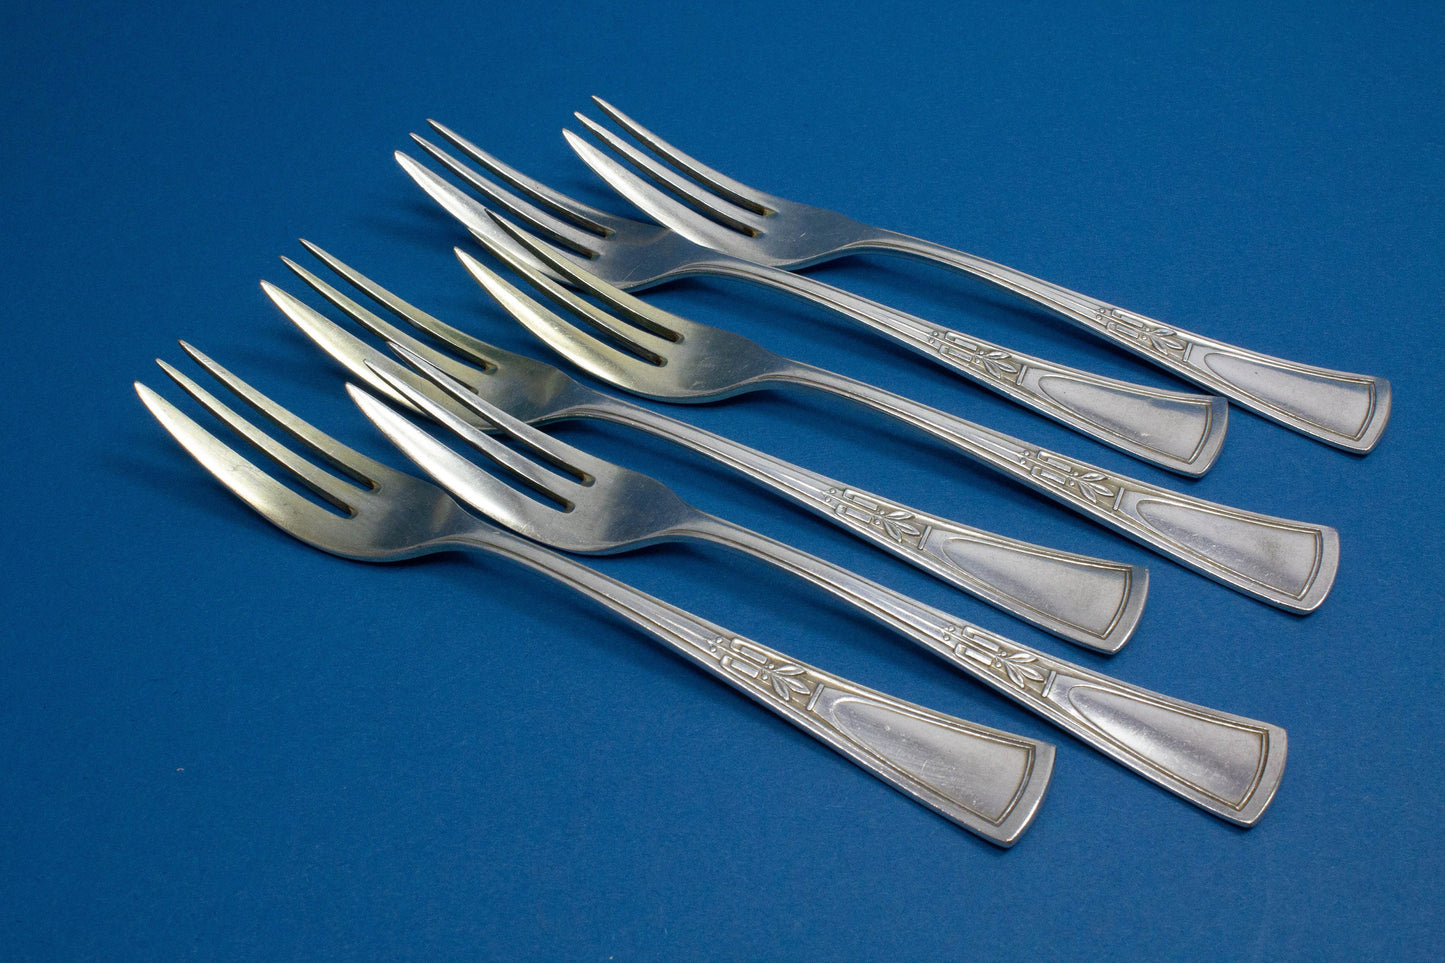 6 cake forks and 6 teaspoons with a lily pattern, Art Nouveau, silver plated